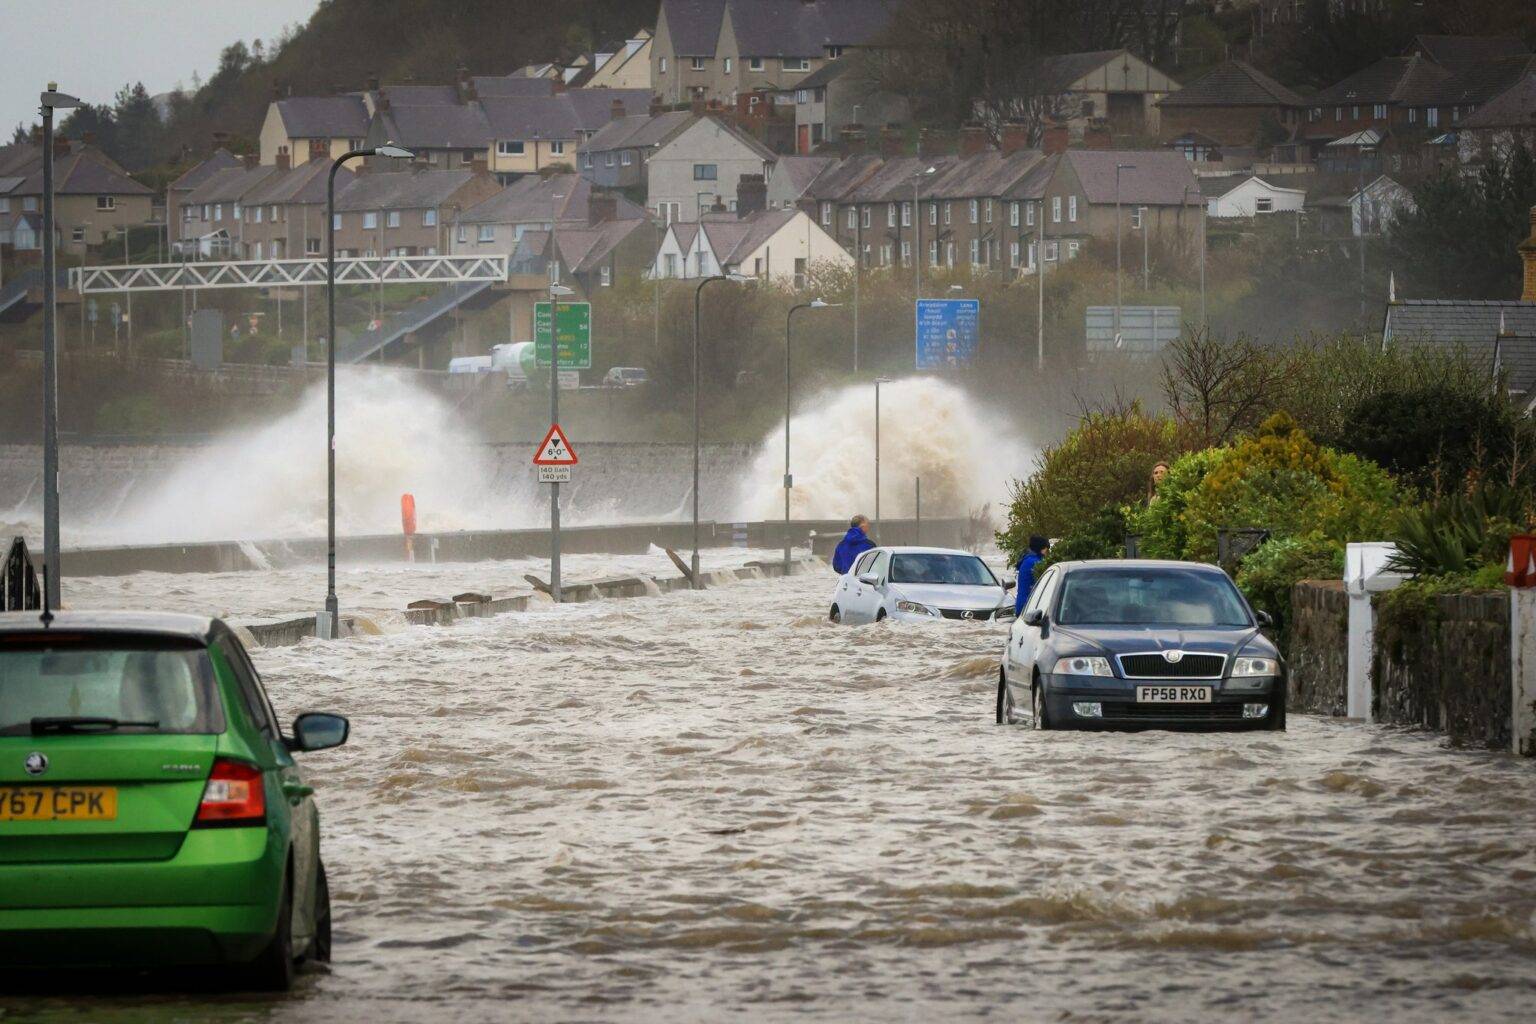 Storm Pierrick causes flooding in North Wales – Chaos, evacuations and closures